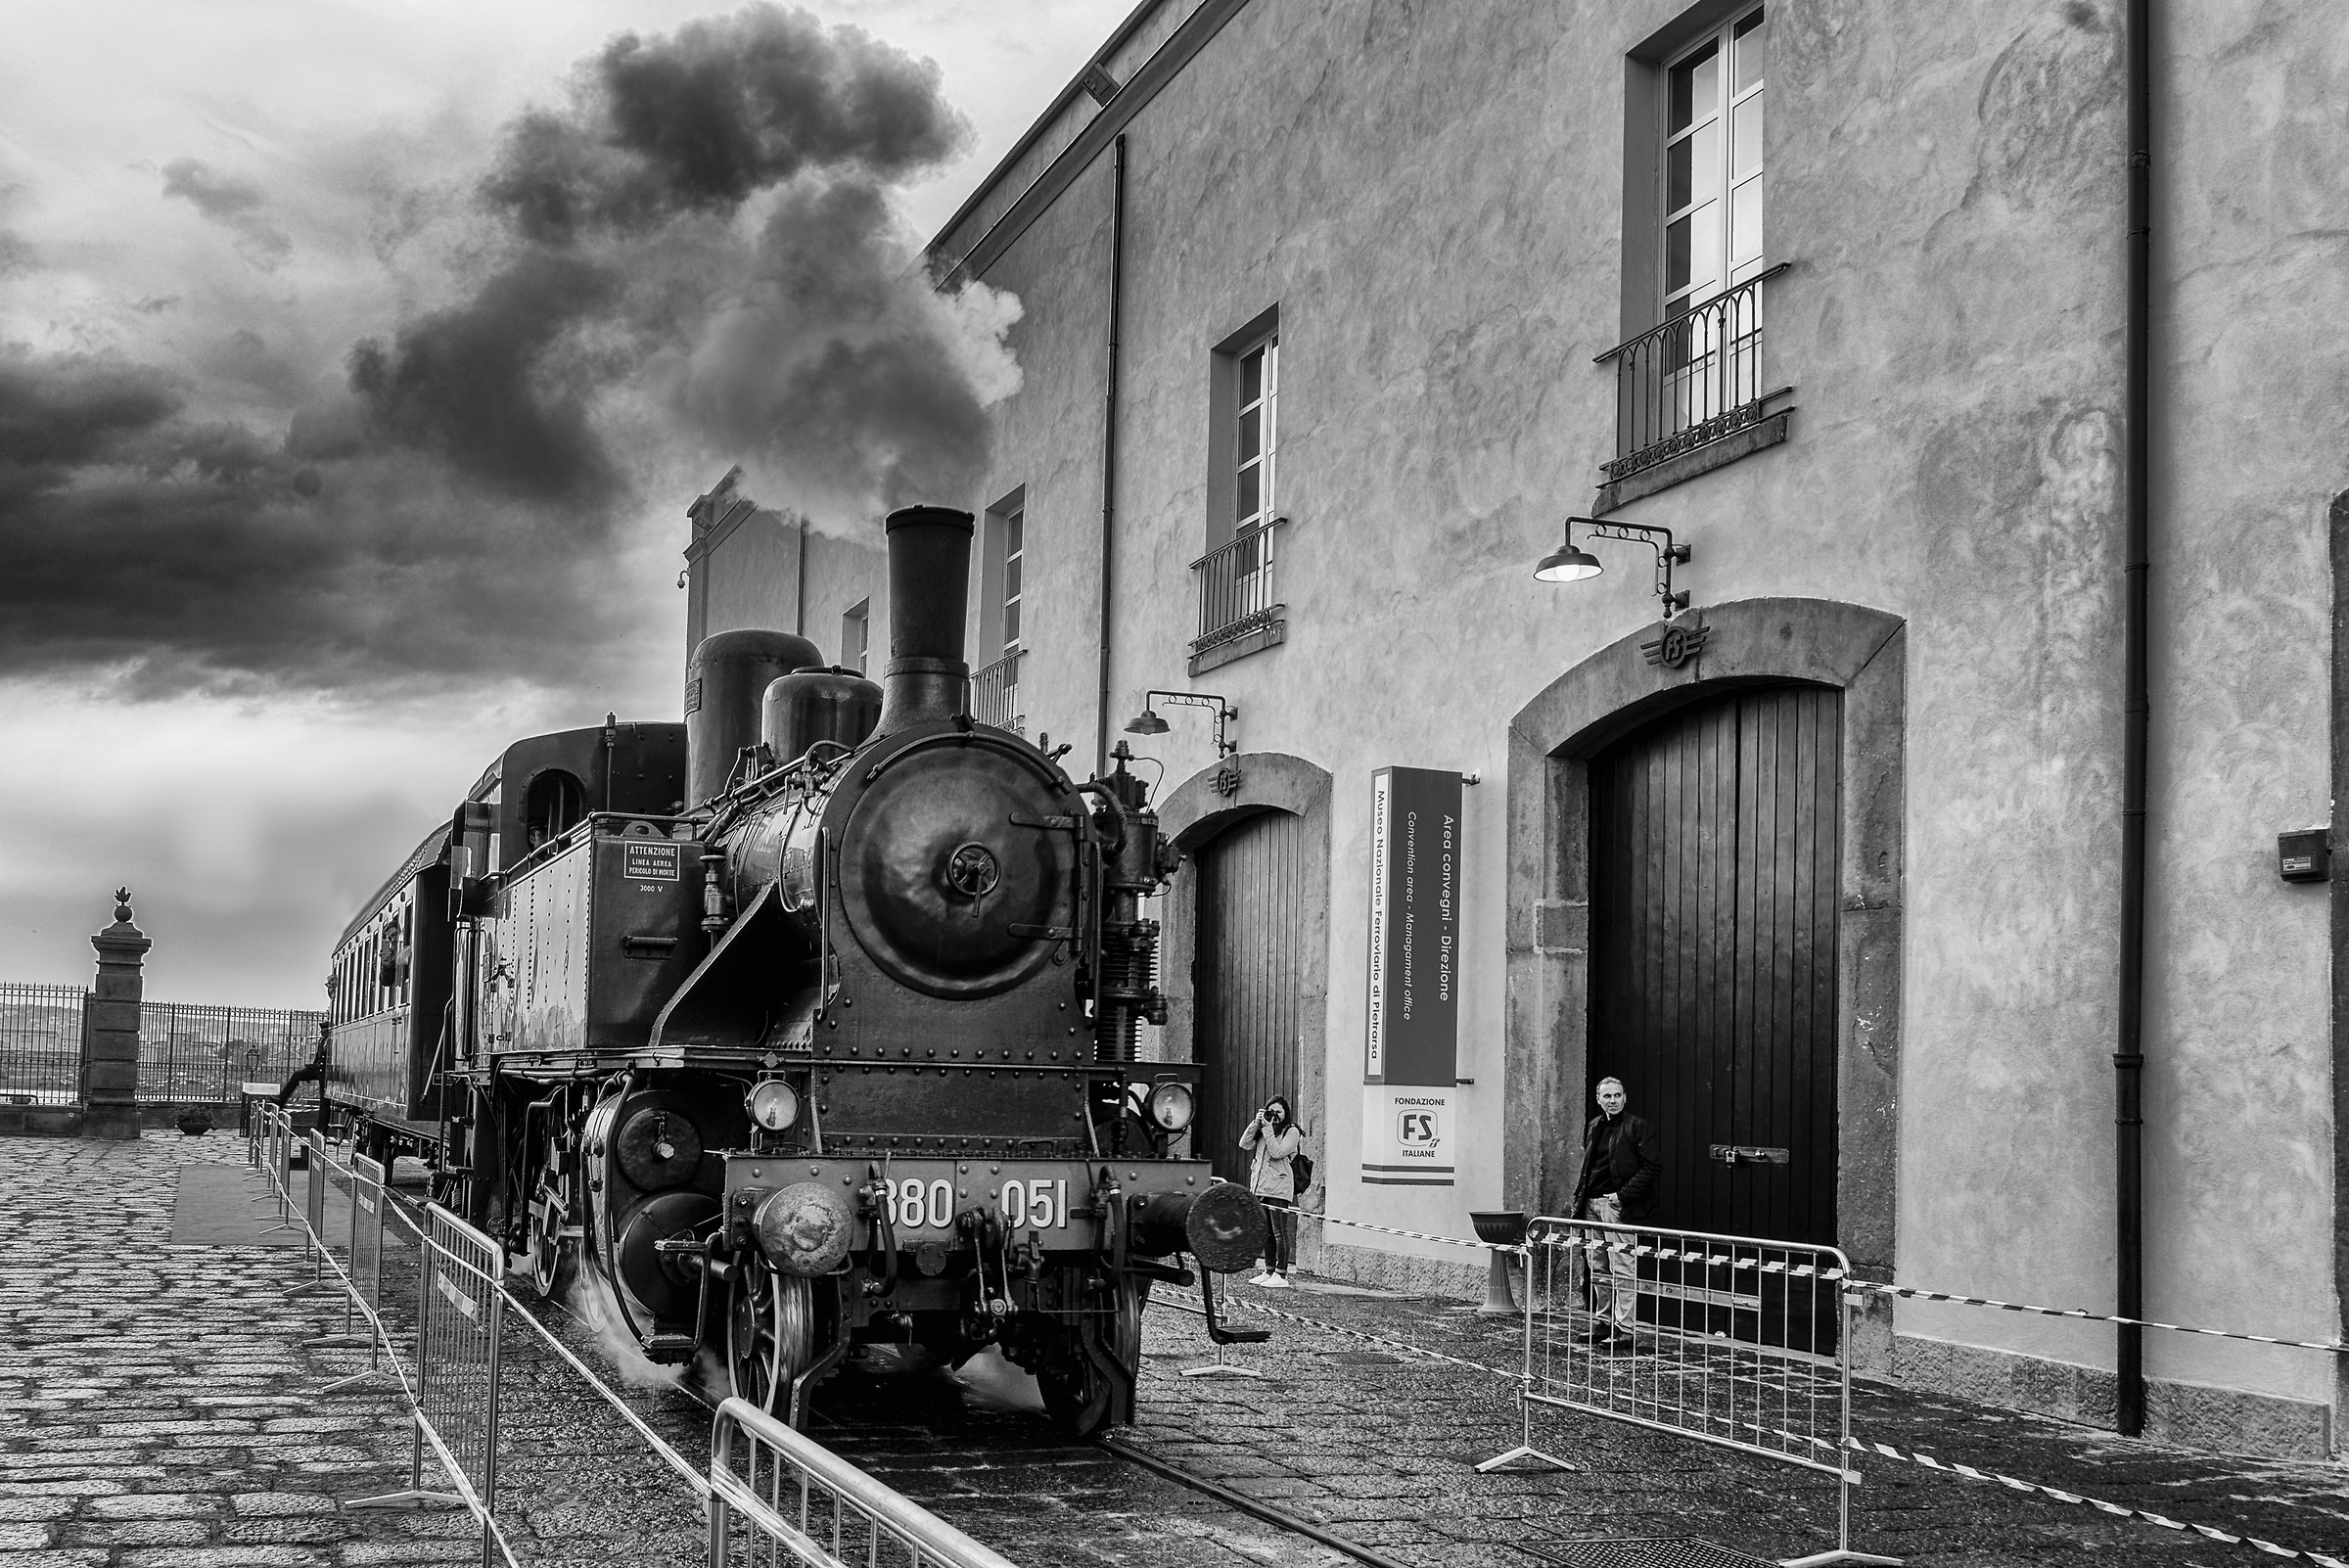 The Departure of the steam train...